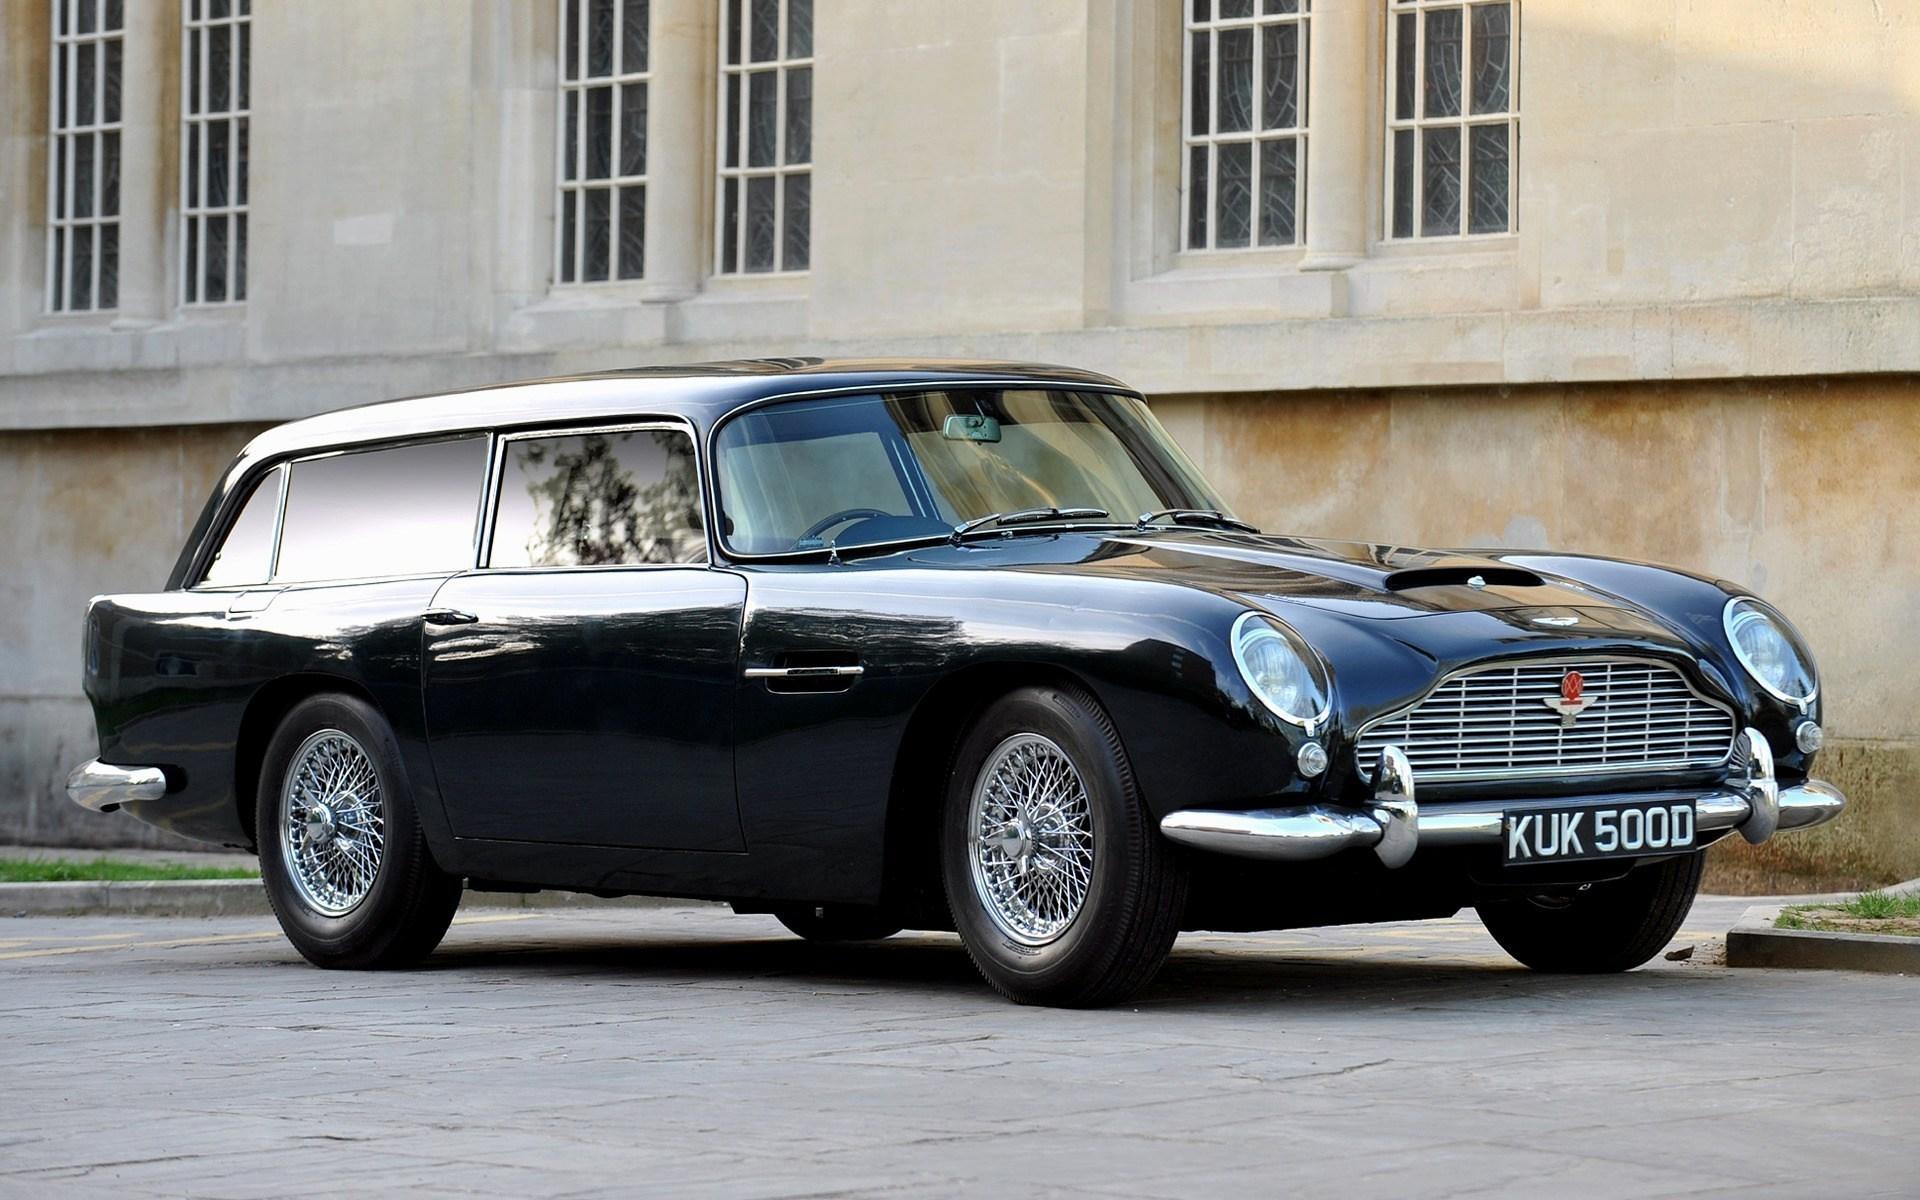 Aston Martin Db5 Wallpaper HD Photo Wallpaper And Other Image